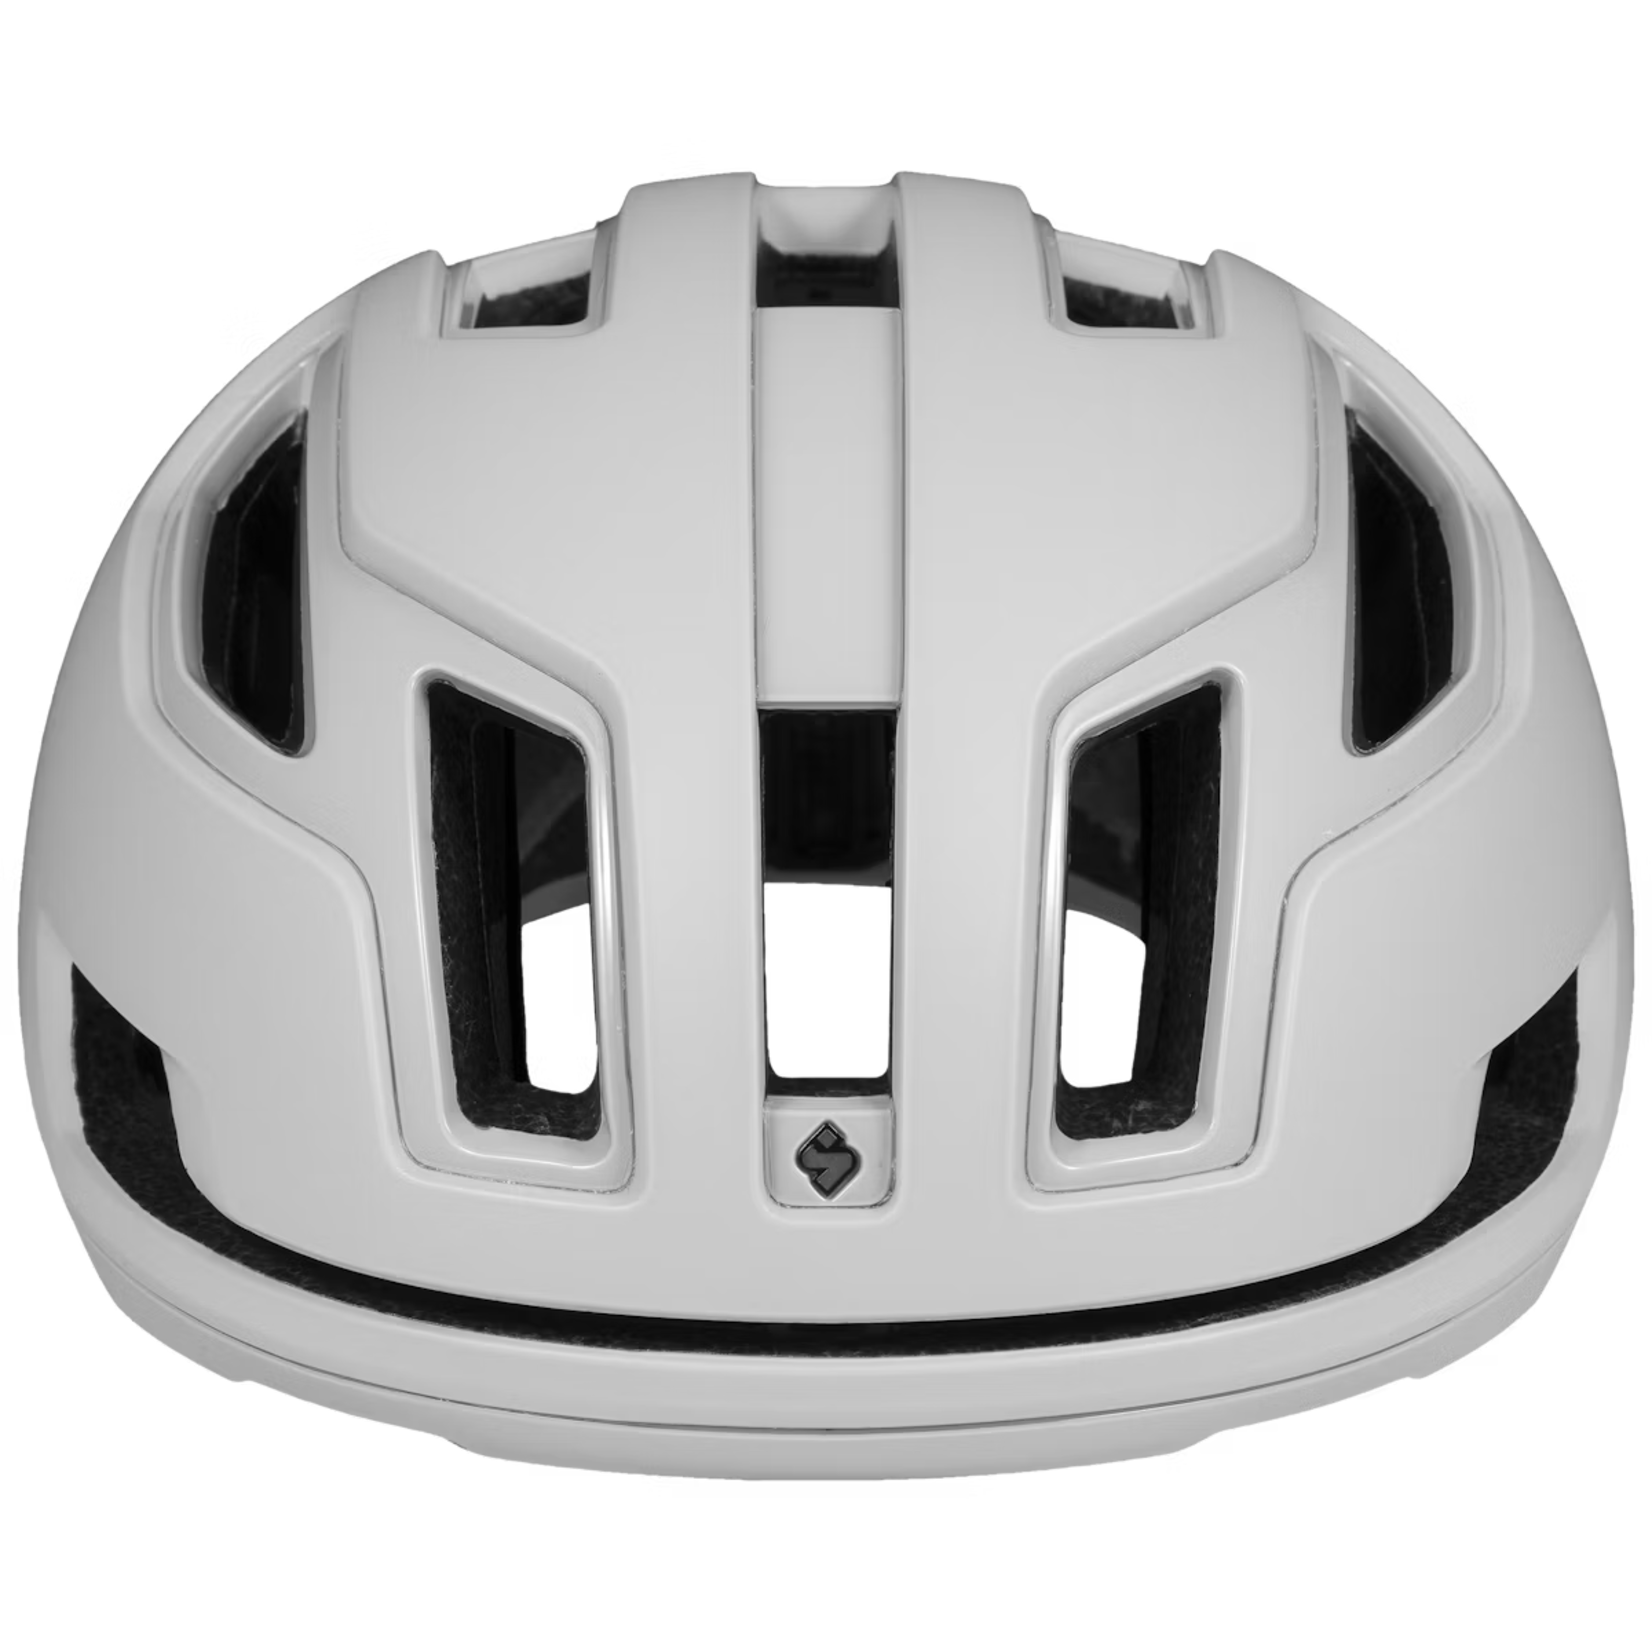 Sweet Protection Sweet Protection Falconer 2Vi MIPS Helmet